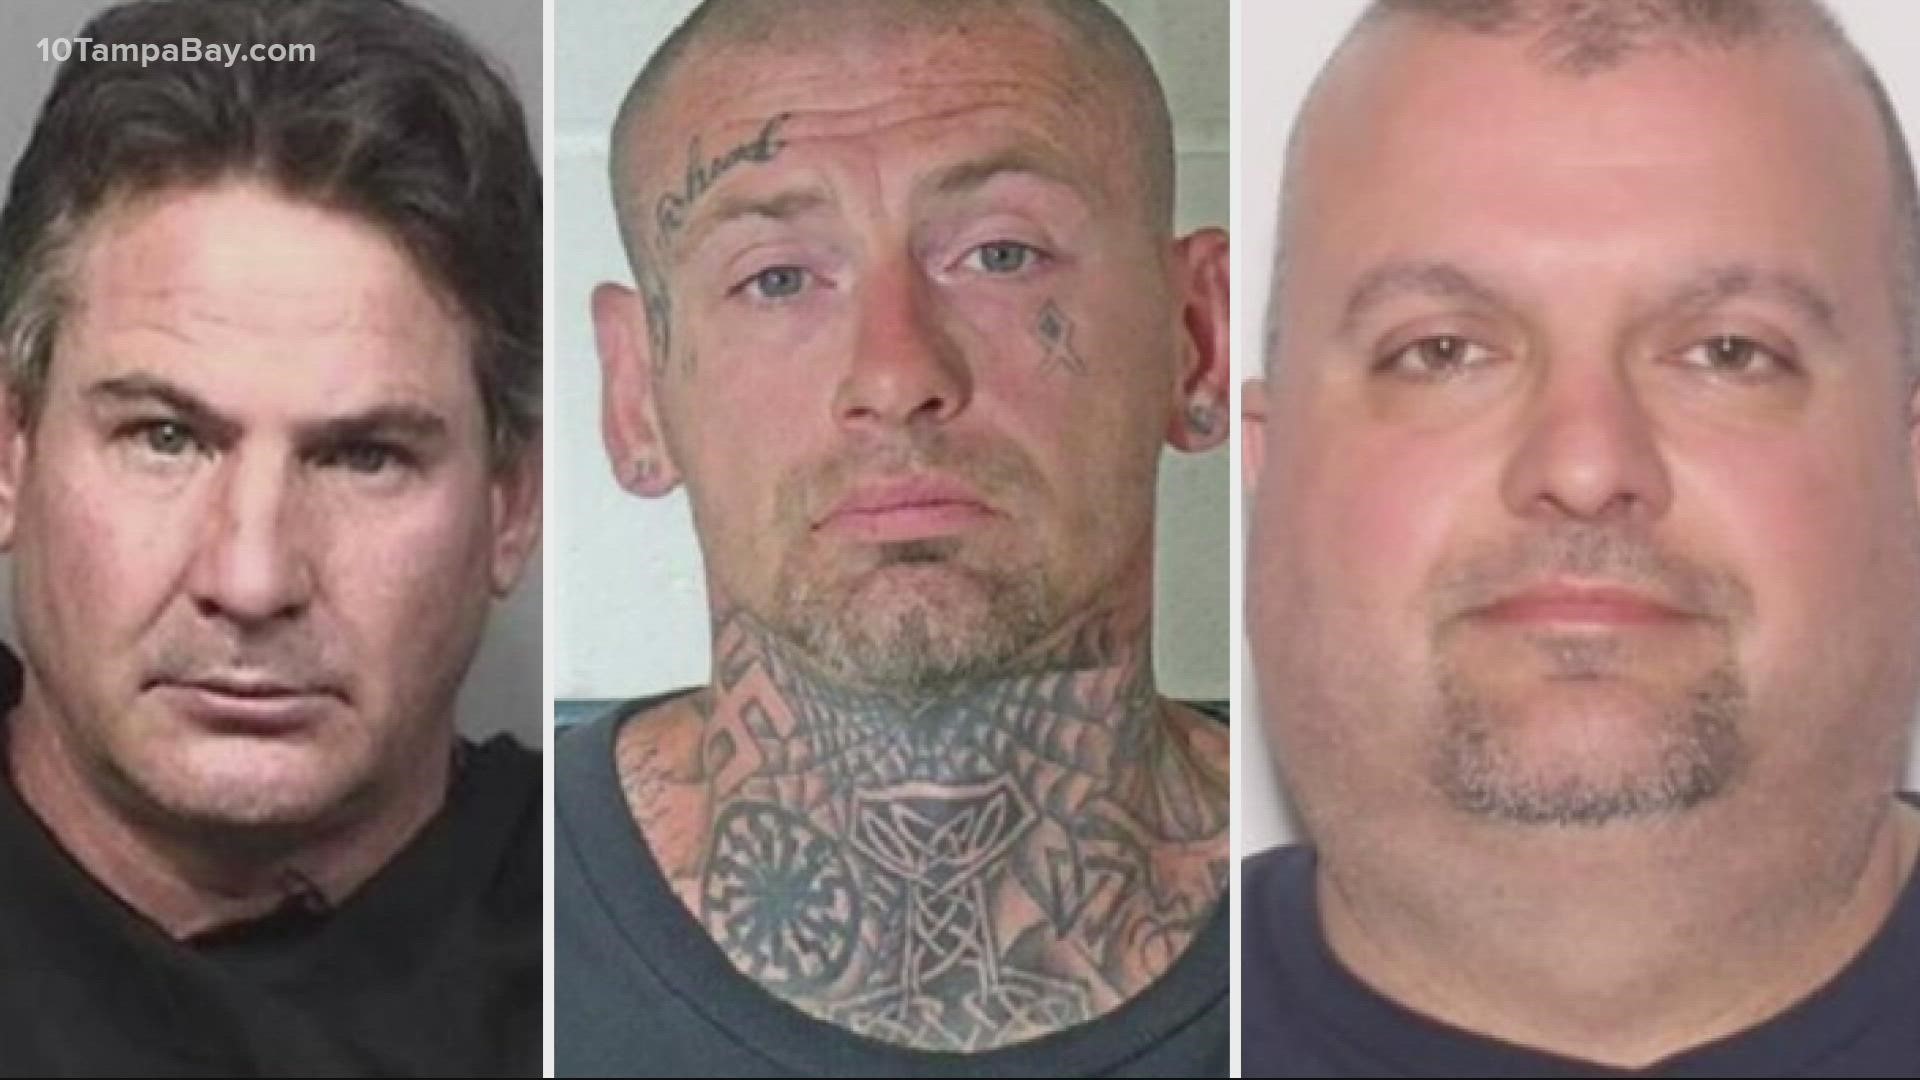 The Orange County Sheriff's Office says the men played a role in hurling antisemitic slurs, spitting on, punching and pepper spraying the driver.